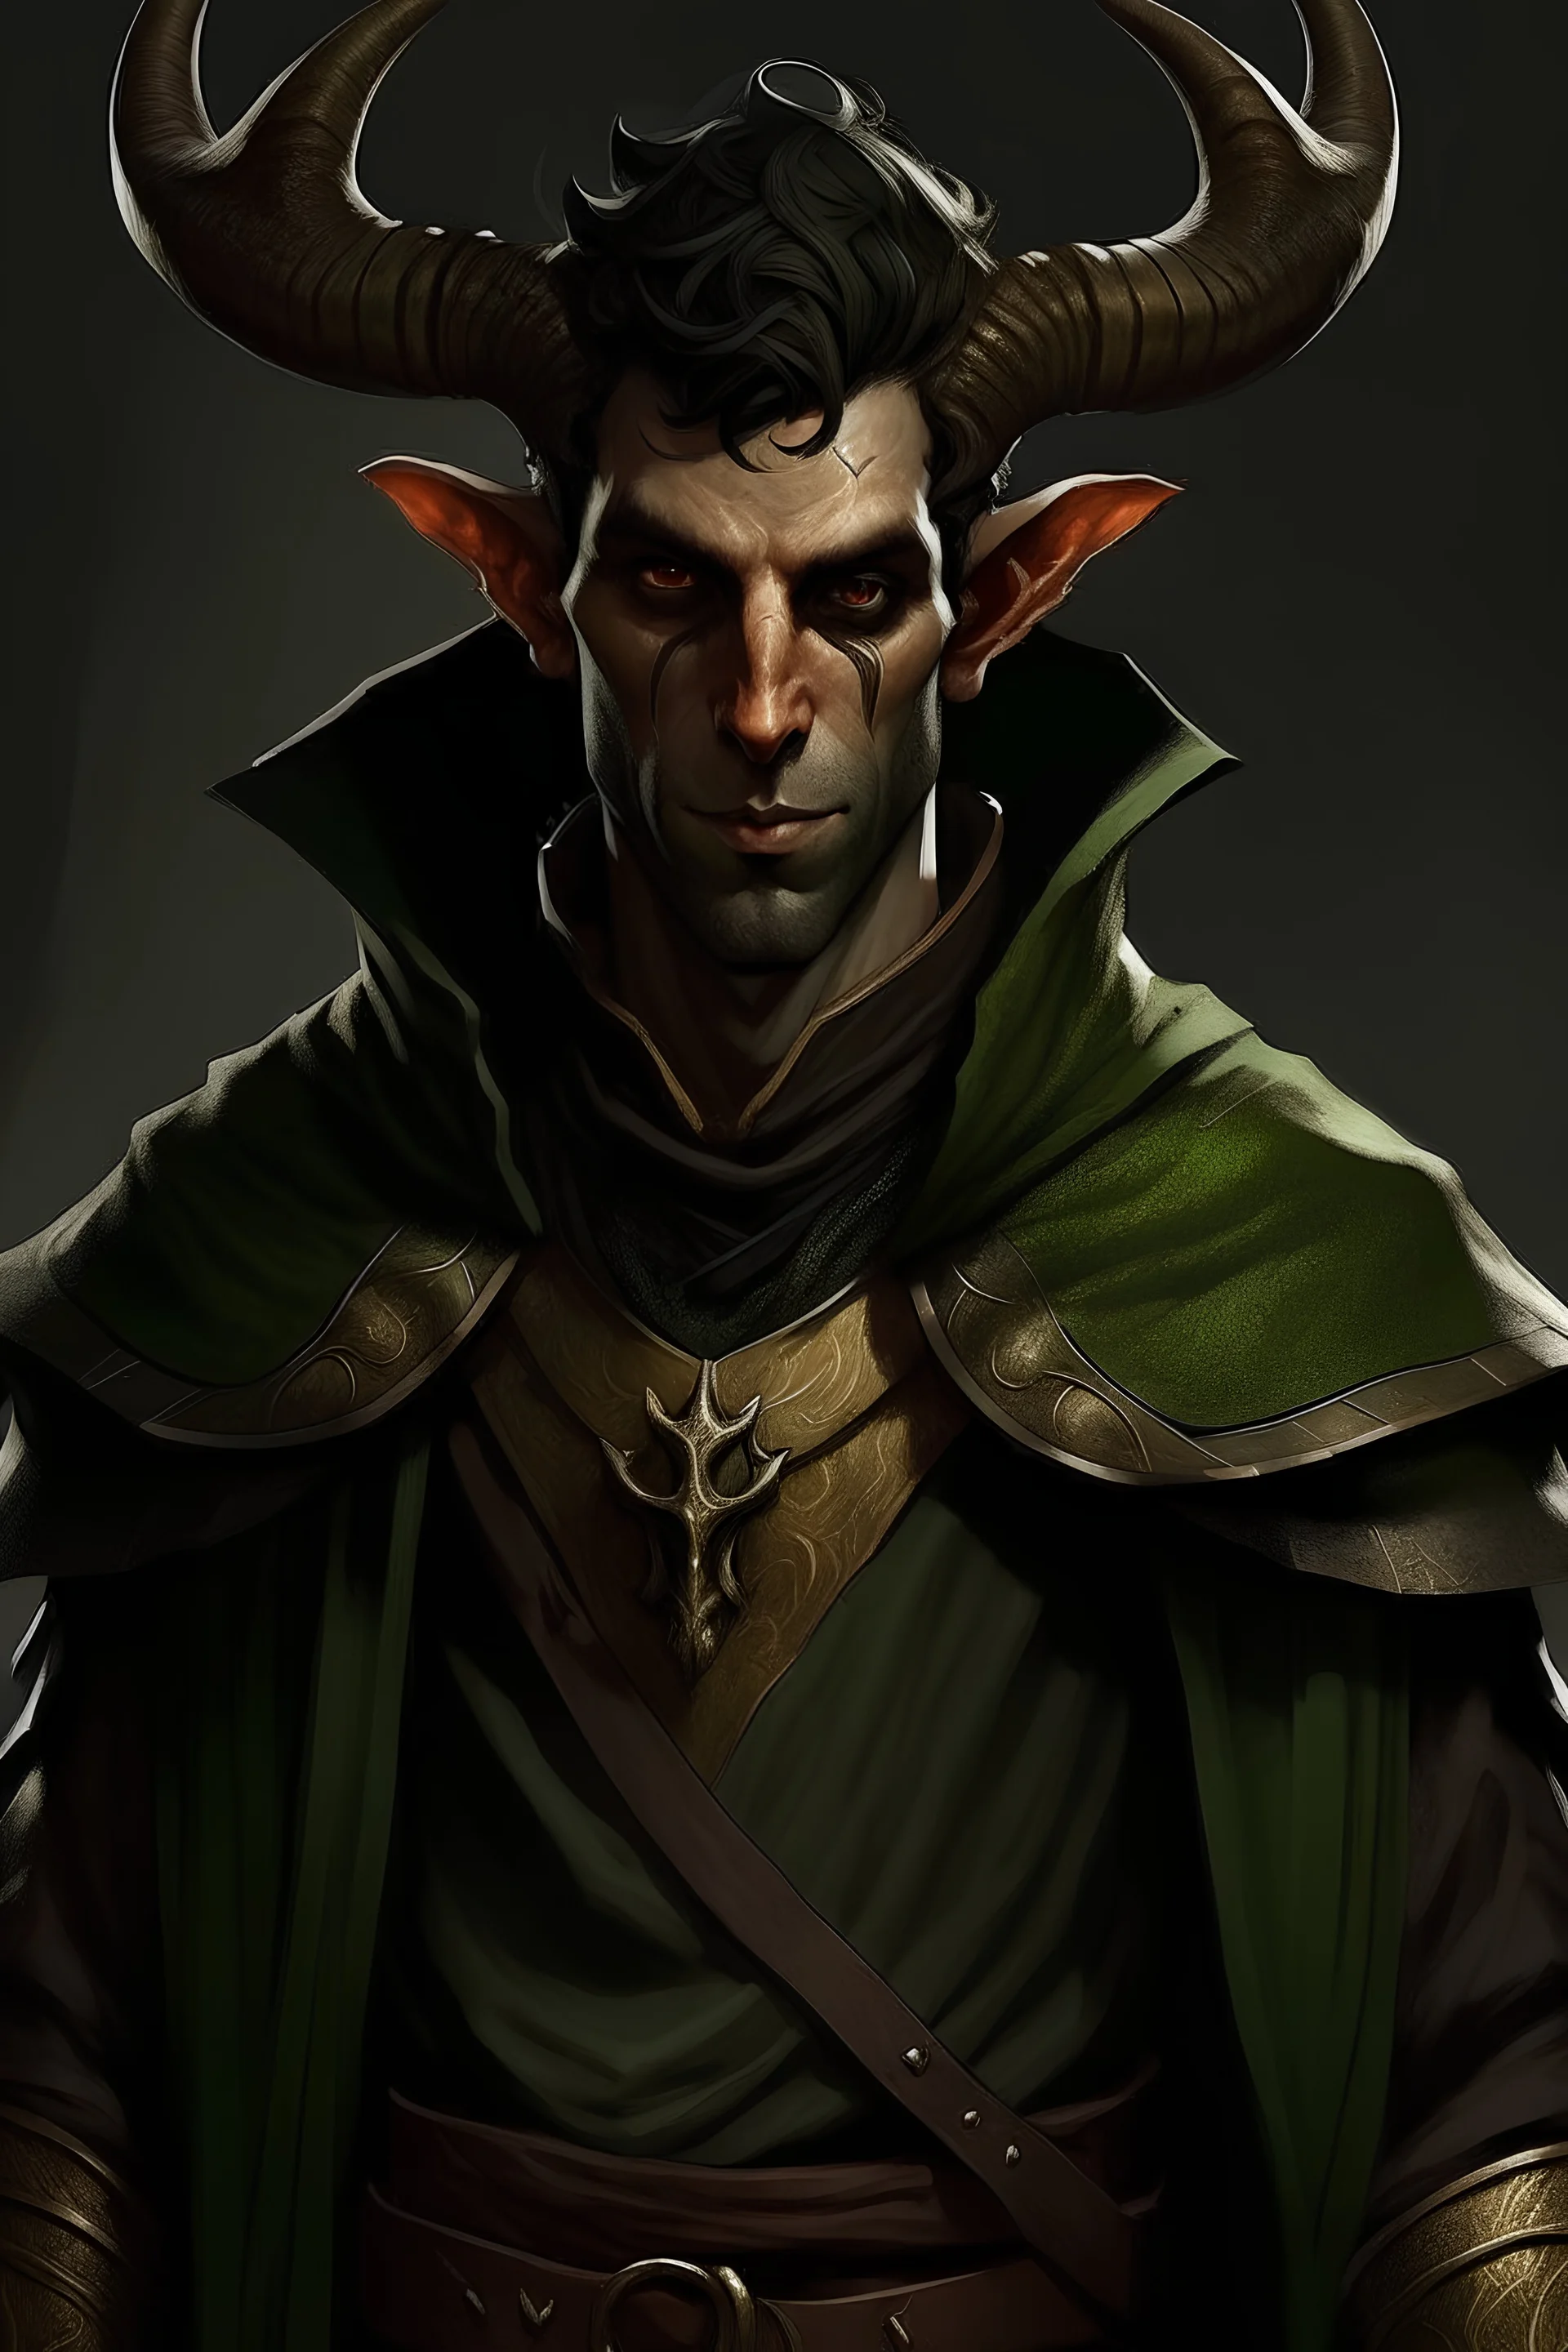 dnd character art of a male tiefling warlock. Short ram-style horns, black eyes, tiny pointed ears, tanned skin, olive complexion, black hair. Dressed in worn, tanned leather armor and a weathered, dark green cloak, styled after a jedi. Cinematic, cgi, unreal engine